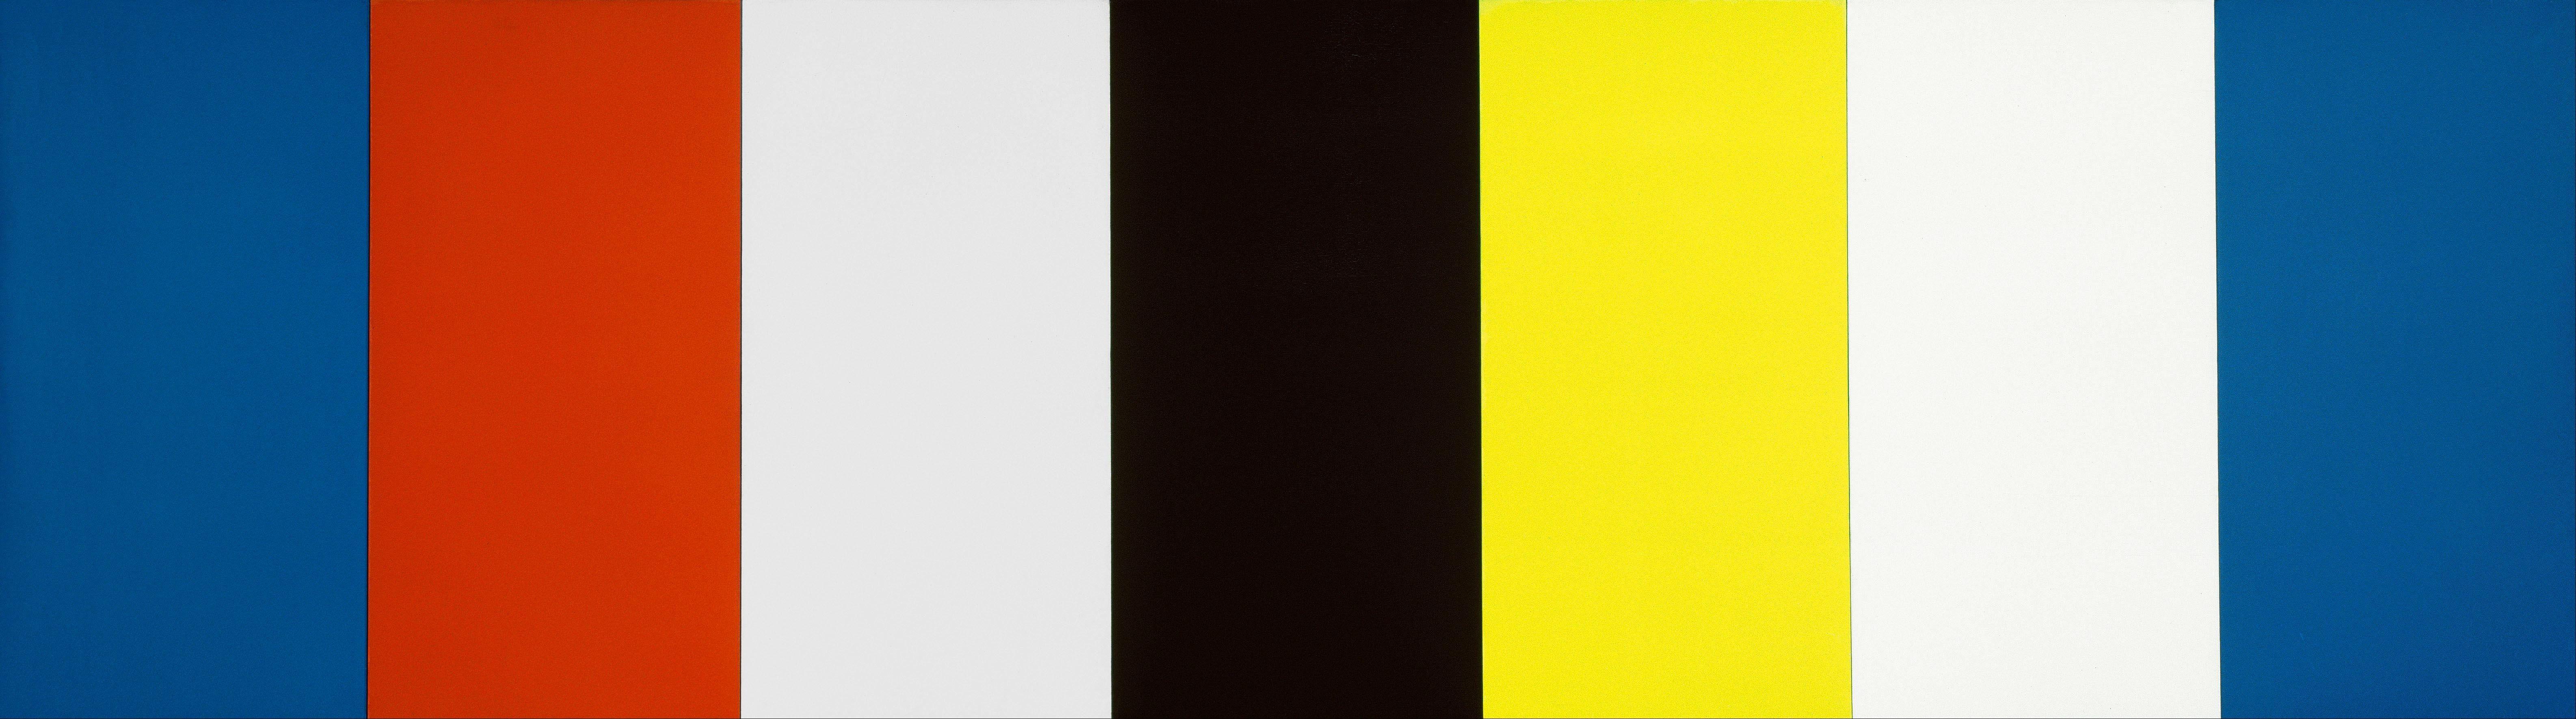 Red White and Yellow Logo - File:Ellsworth Kelly - Red Yellow Blue White and Black - Google Art ...